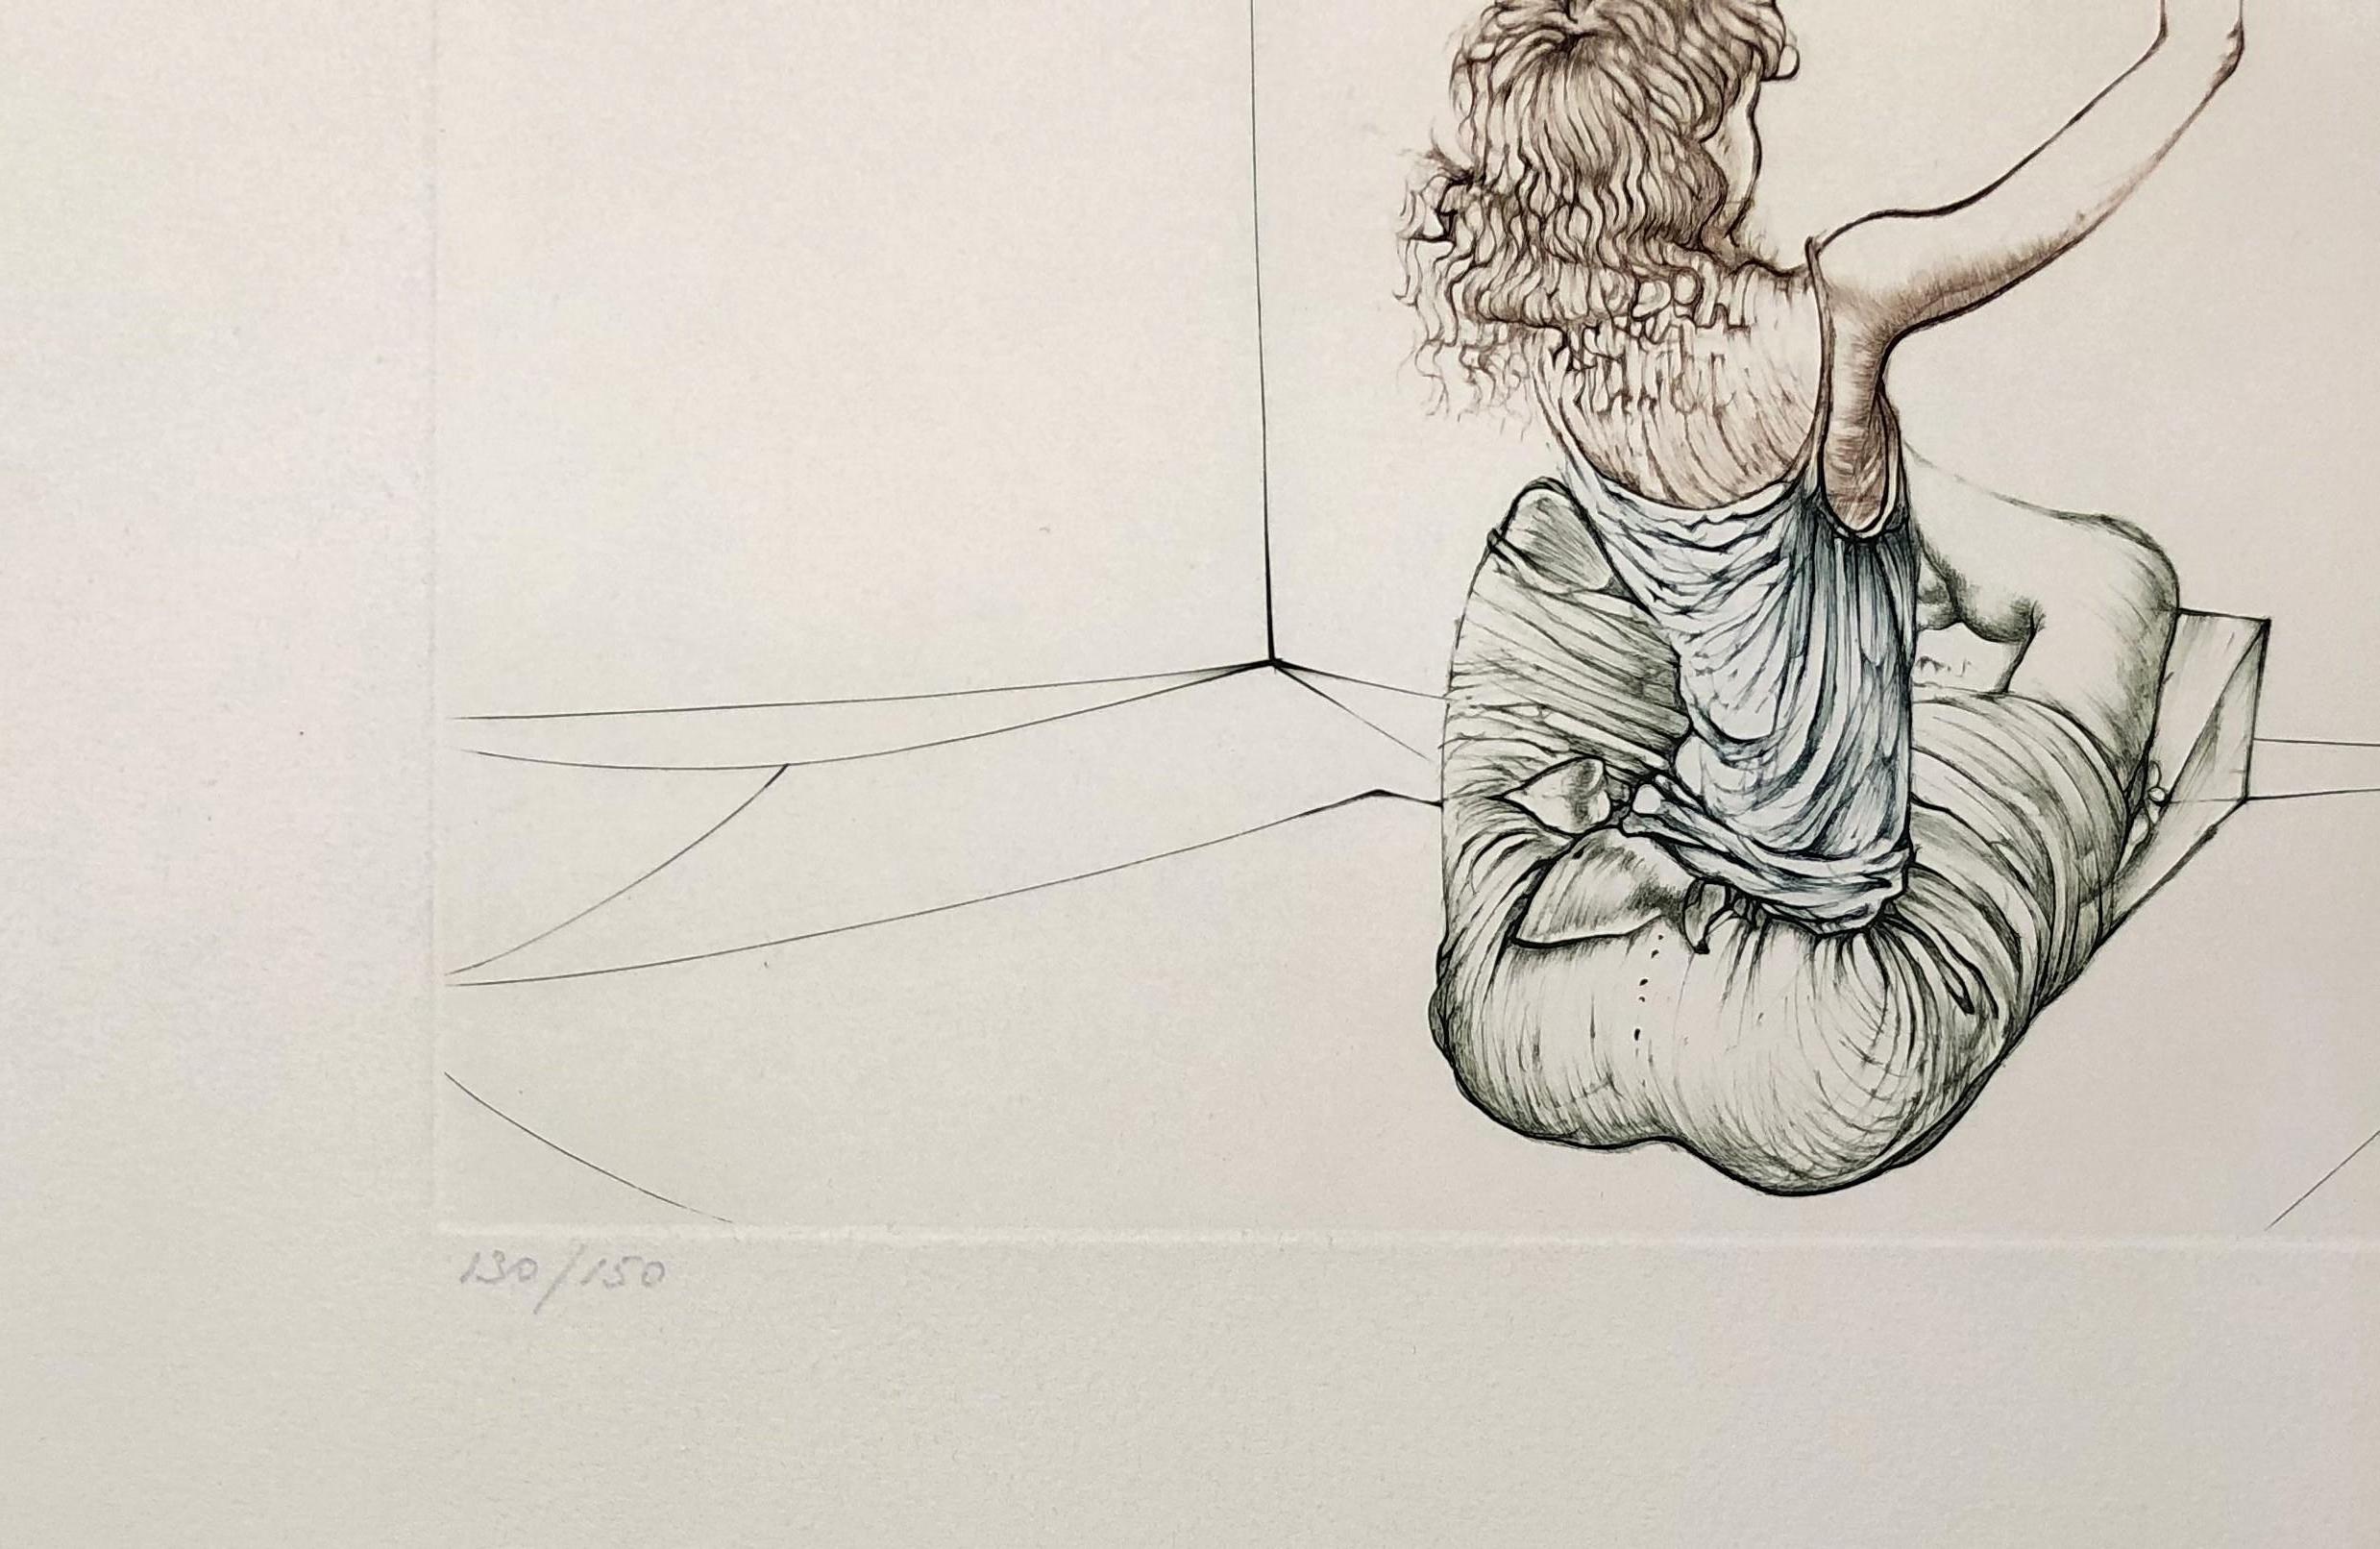 Hans BELLMER
The Dancers

Original etching, 1974
Handsigned in pencil by the artist
Numbered / 150 copies
On Arches paper, size 66 x 50 cm
Very good condition 